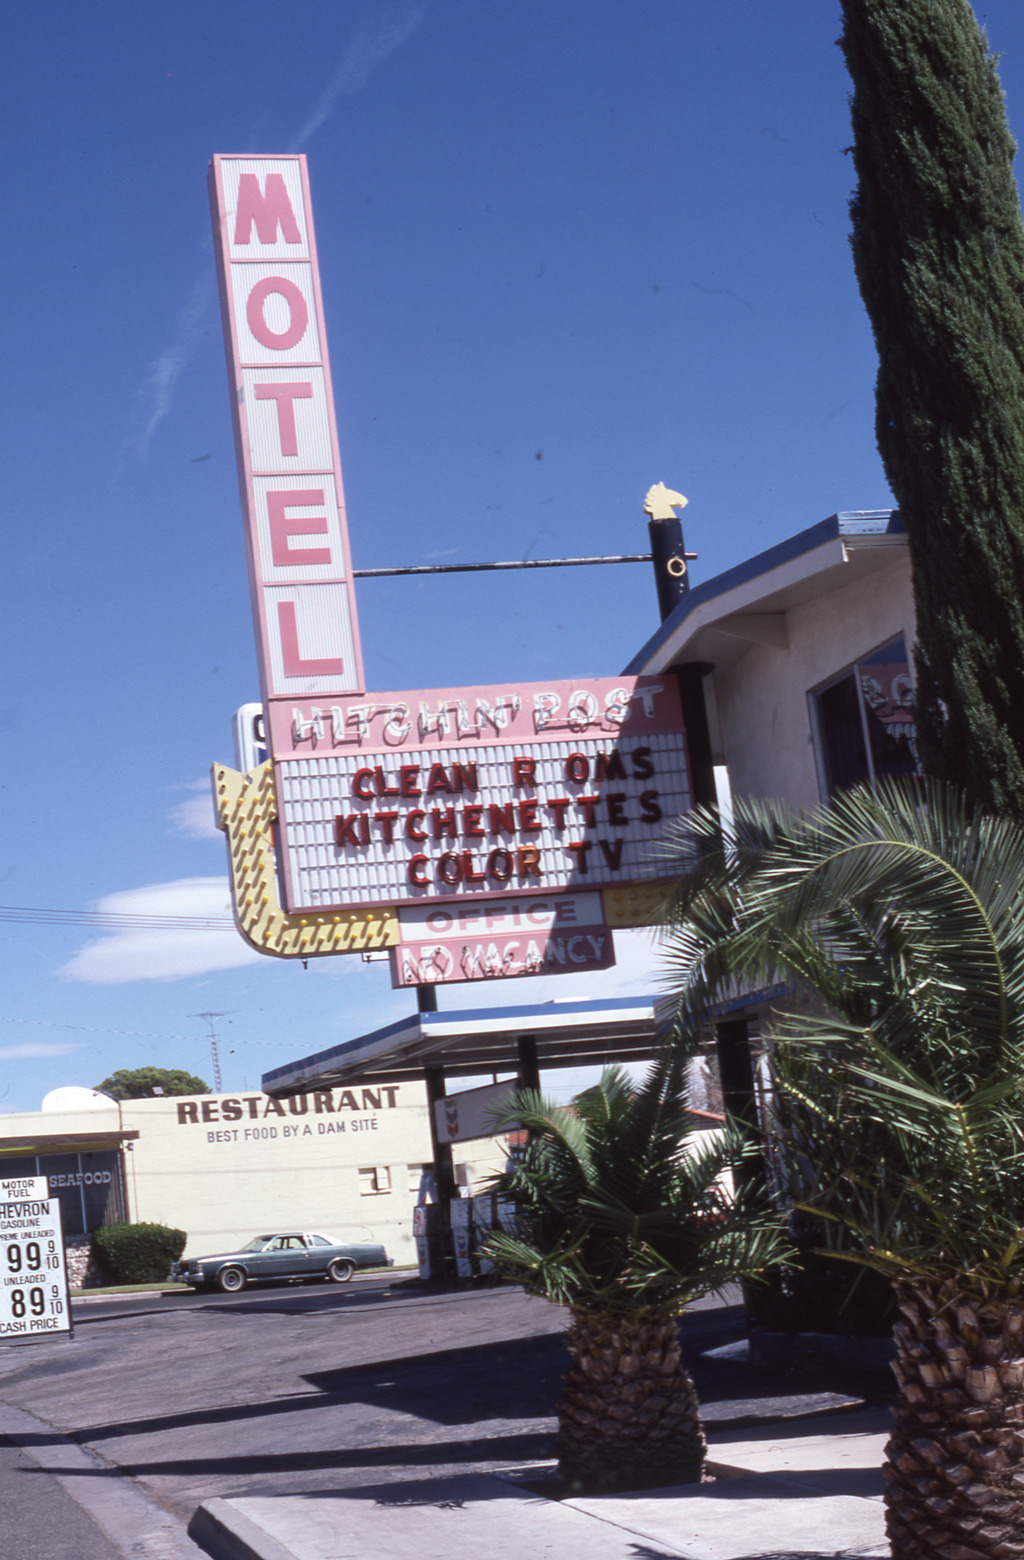 Hitchin' Post Motel flag mounted marquee and wall sign, Las Vegas, Nevada: photographic print